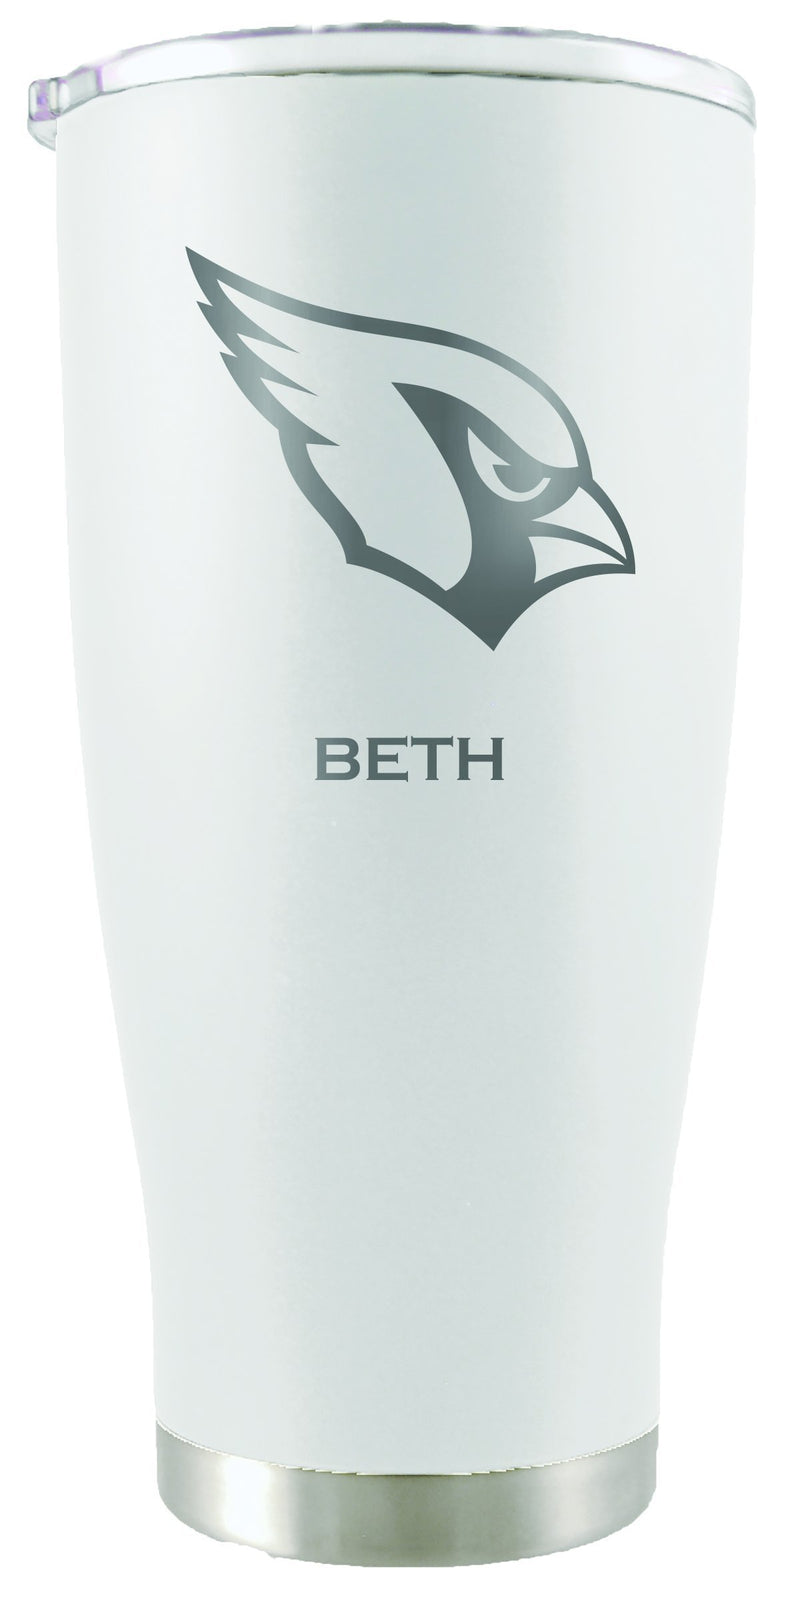 20oz White Personalized Stainless Steel Tumbler | Arizona Cardinals
ACA, Arizona Cardinals, CurrentProduct, Drinkware_category_All, NFL, Personalized_Personalized, Stainless Steel
The Memory Company